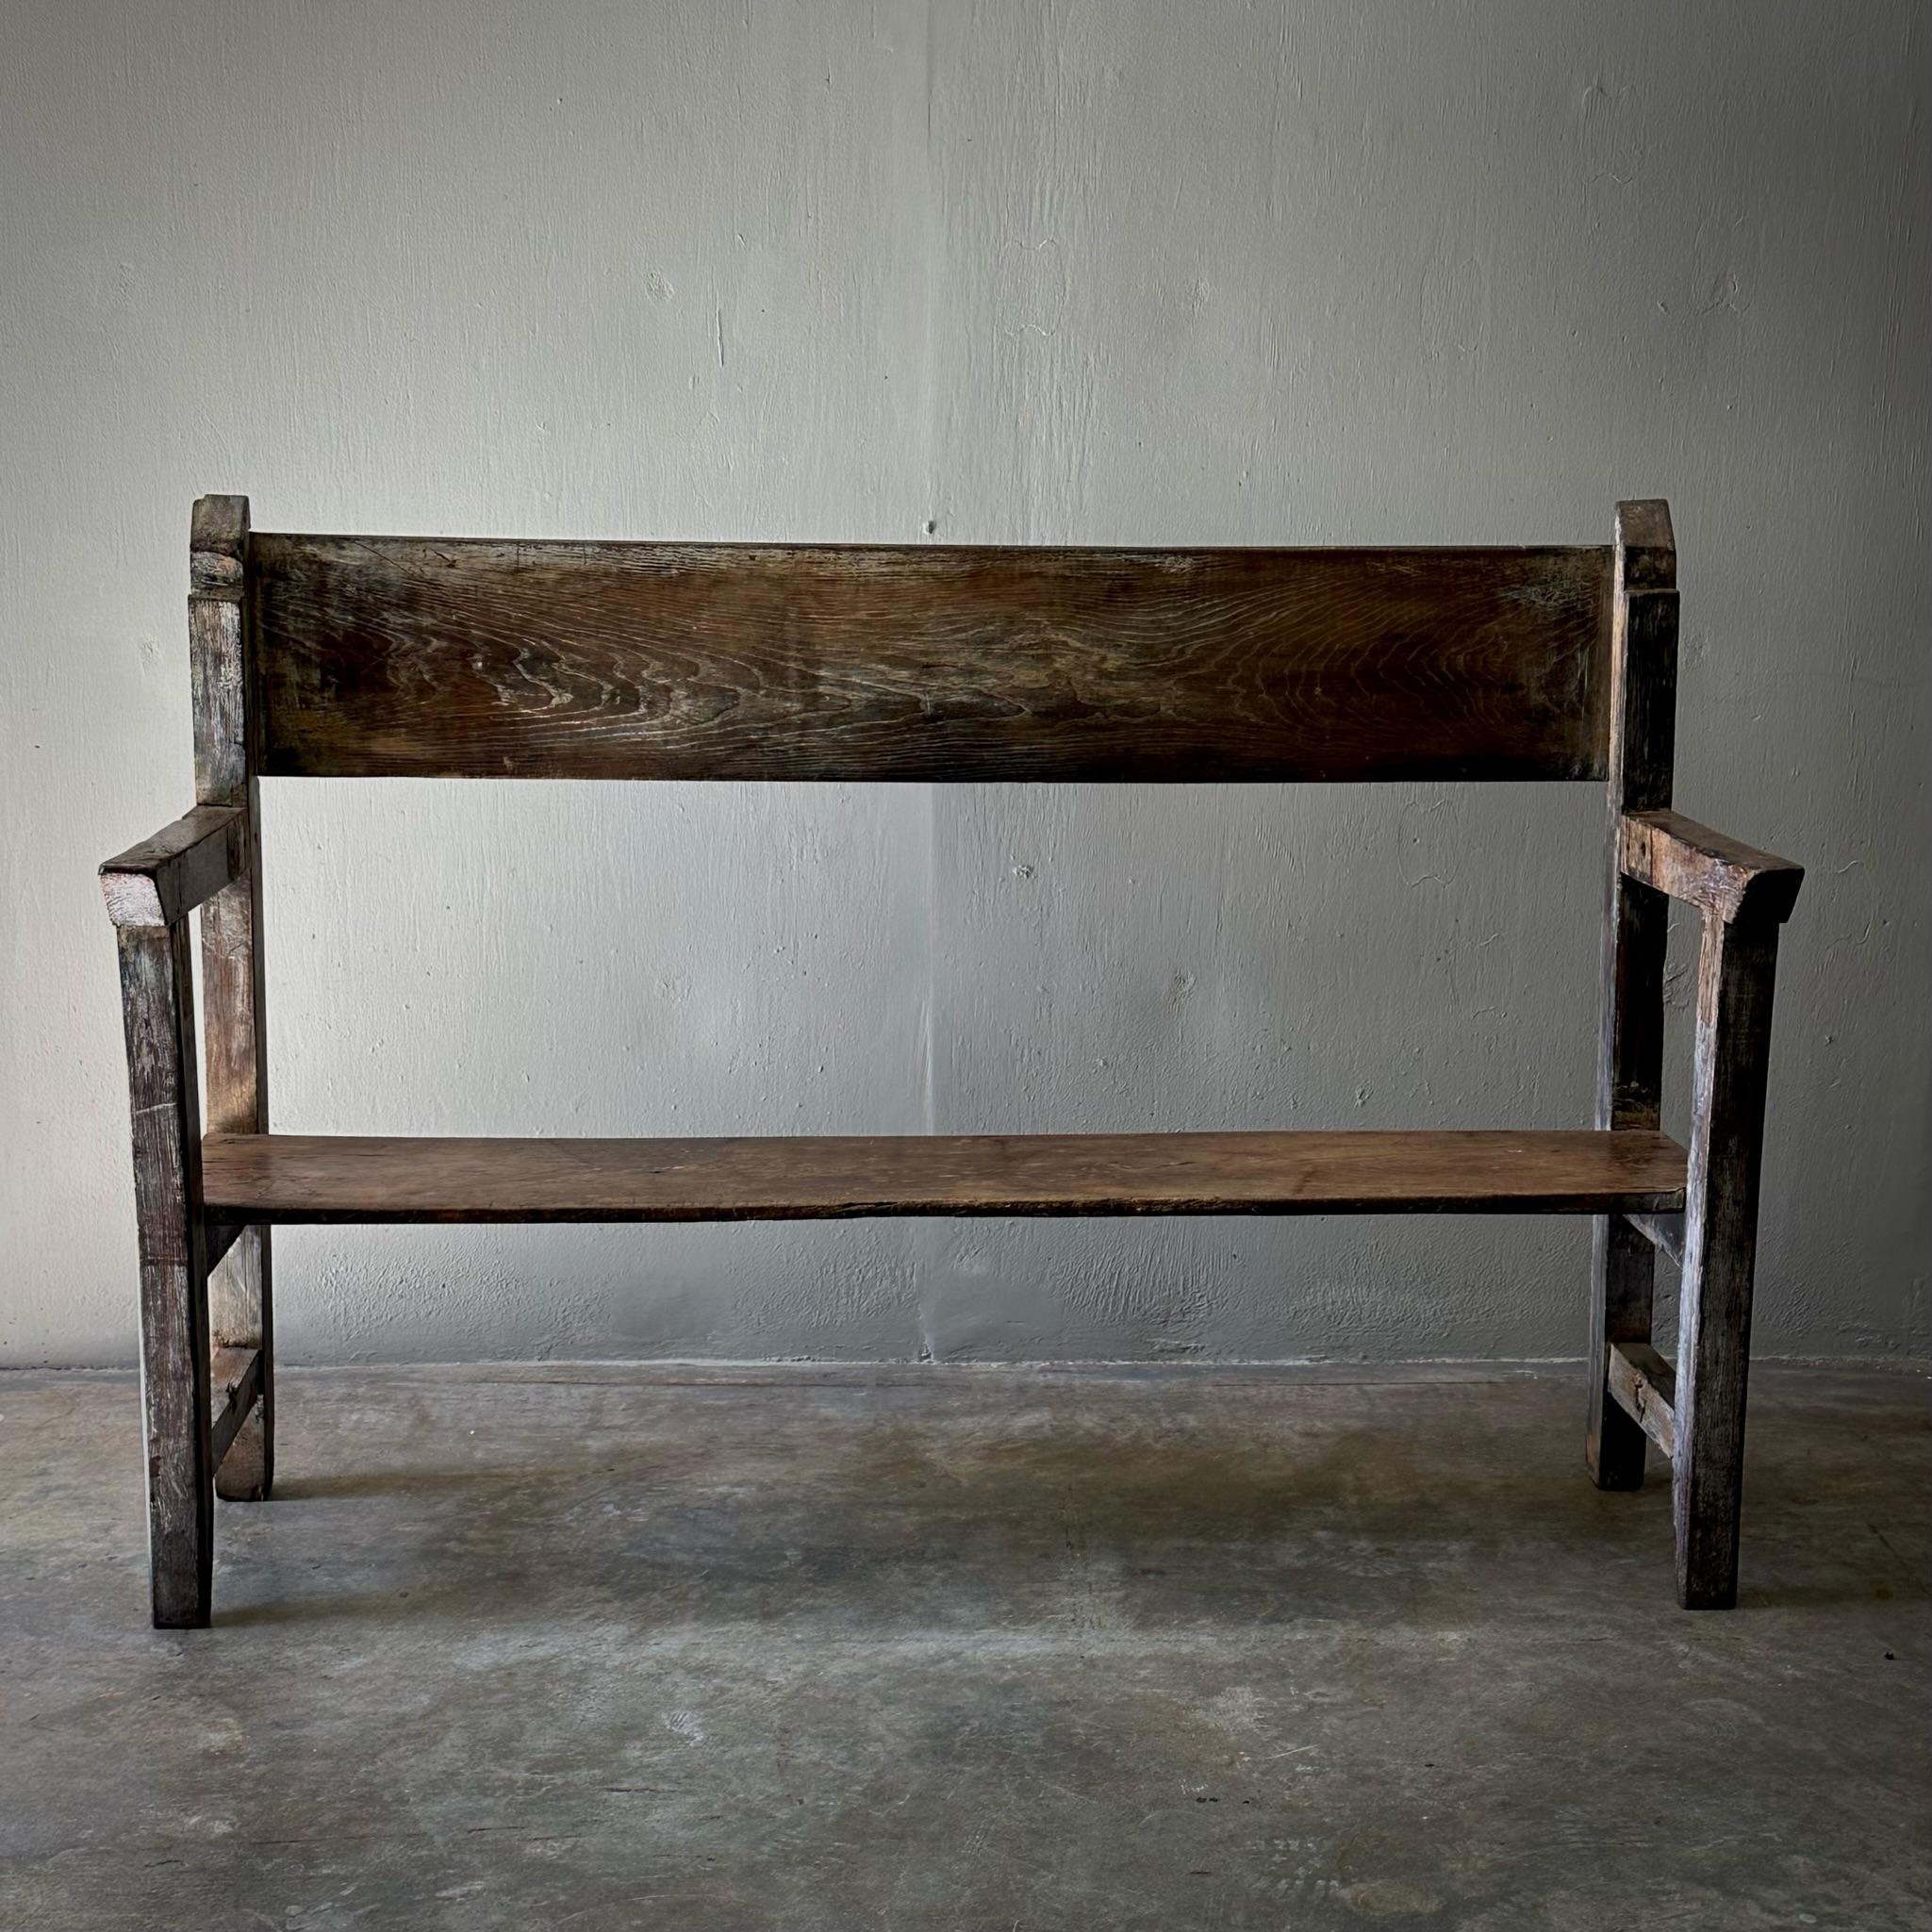 Spanish 19th Century primitive wood bench with wonderful rustic patina and severe, simple lines. Would work well in both indoor and outdoor spaces, or as an entryway or hallway bench. 

Spain, circa 1880

Dimensions: 18.9 W x 61.8 D x 41.3 H x